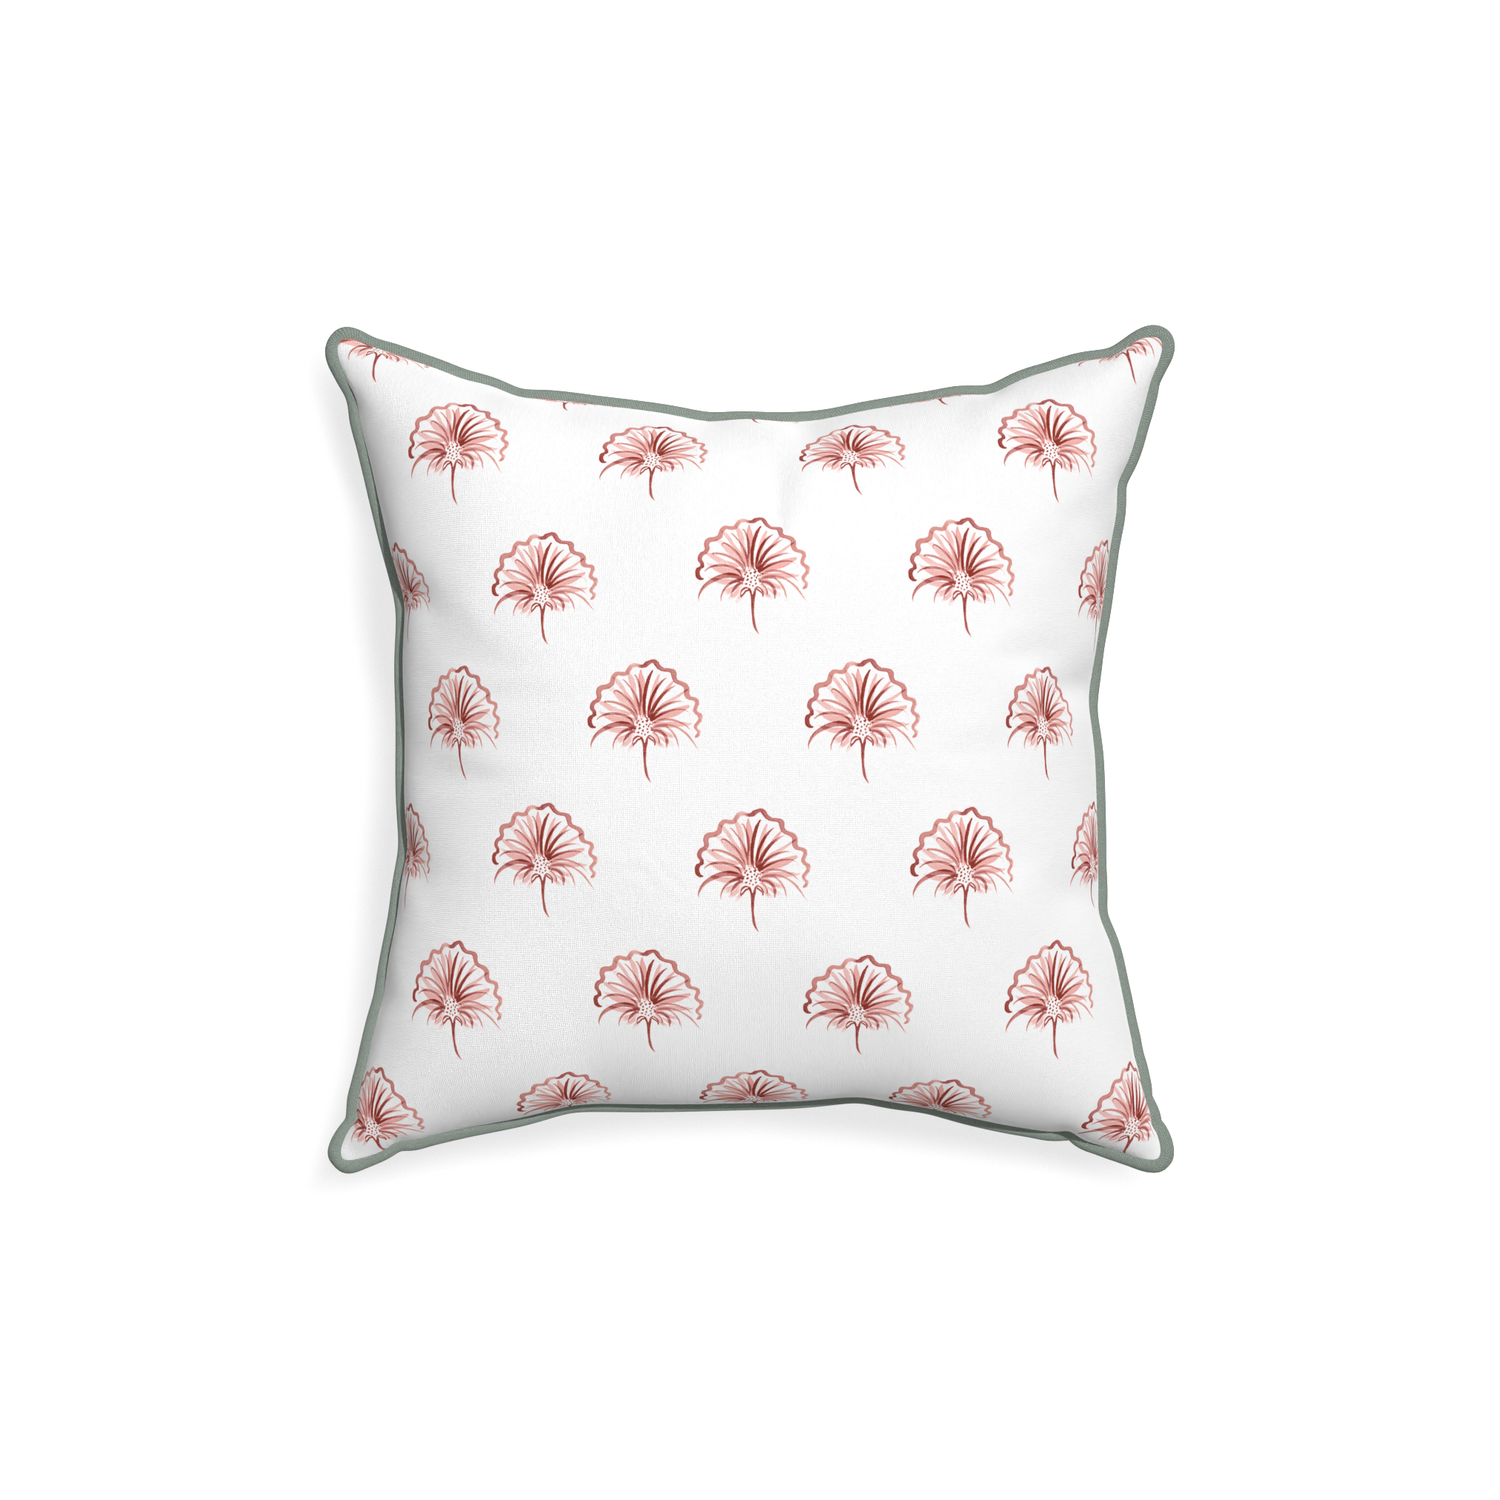 18-square penelope rose custom floral pinkpillow with sage piping on white background